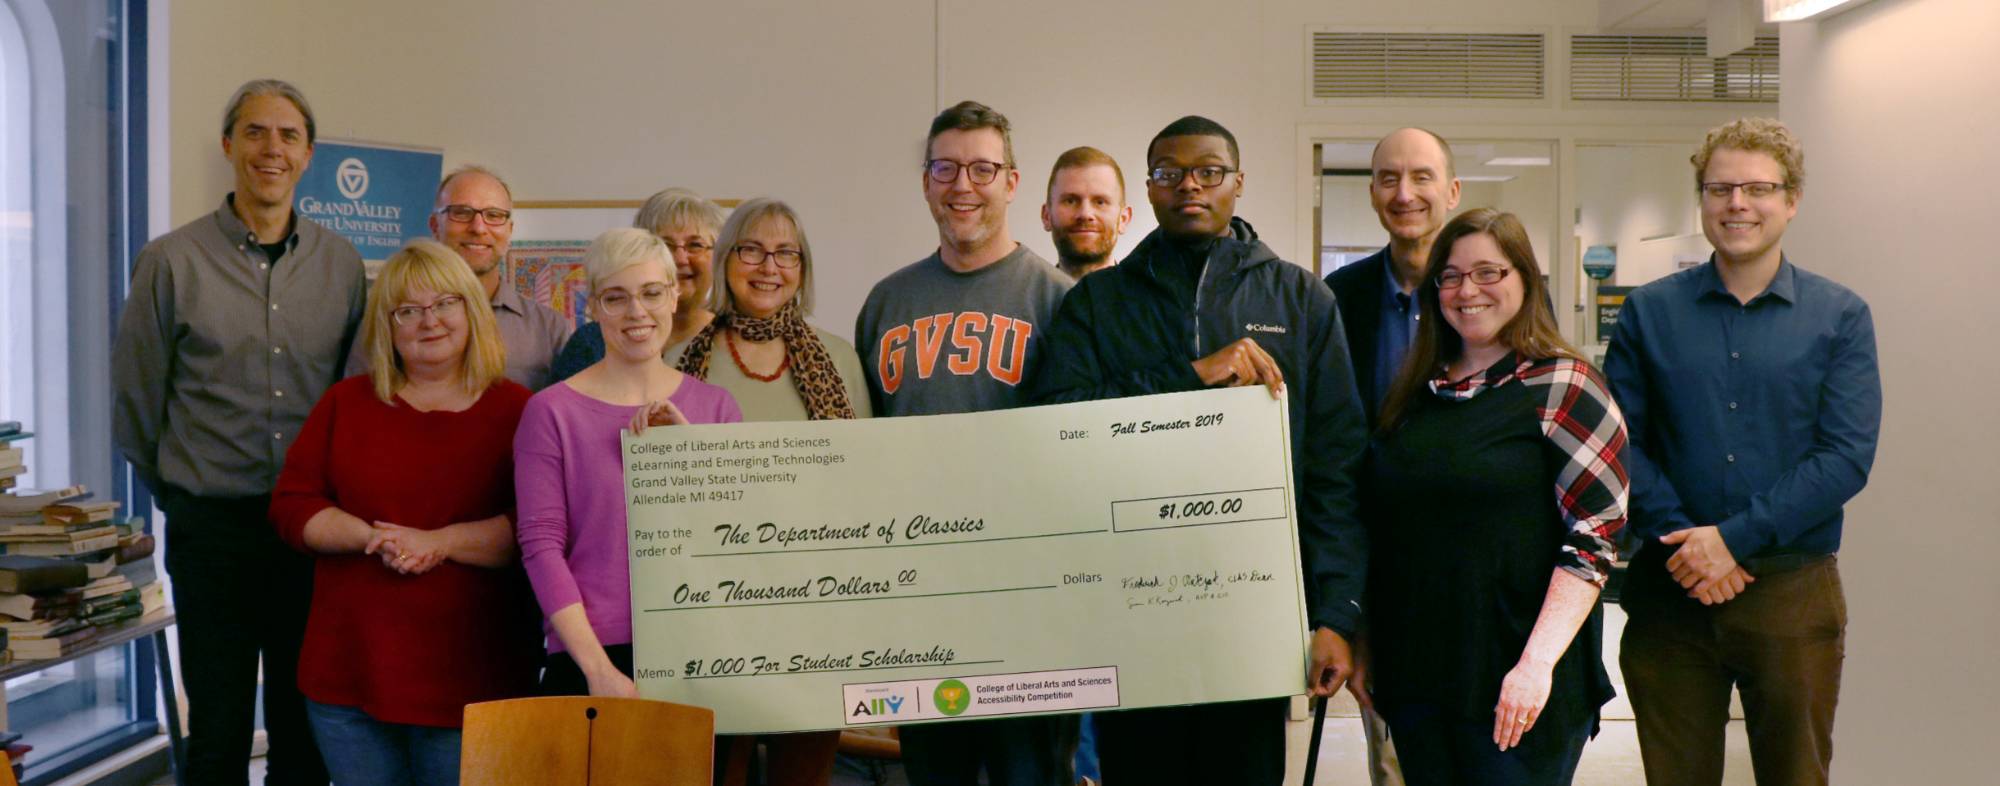 The department of classics staff are pictured holding a large poster check with a total amount of $1,000. The memo of the check is labeled: $1,000 For Student Scholarship